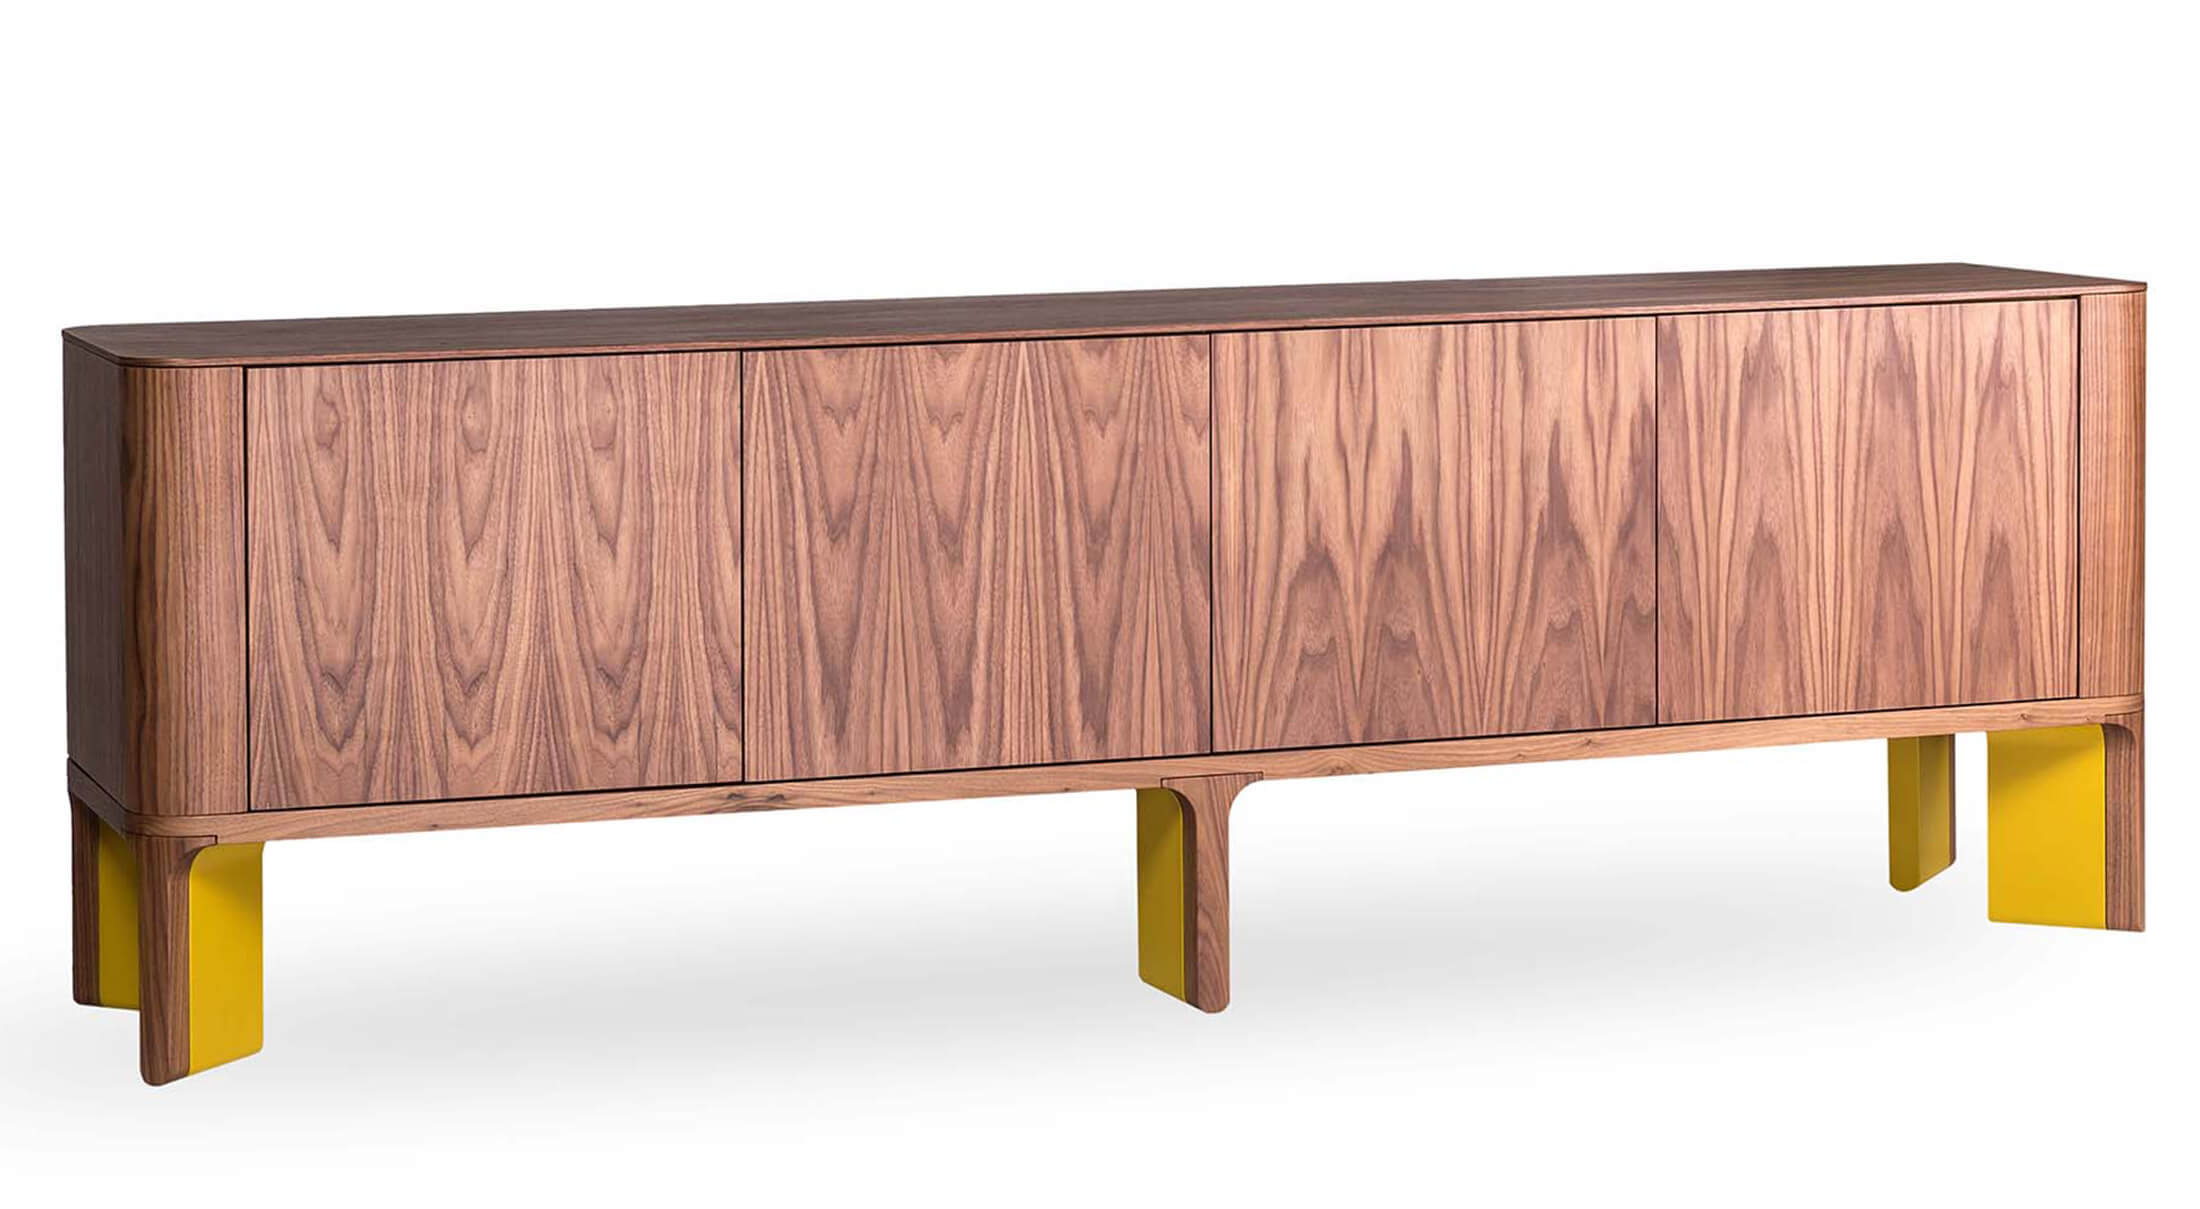 Acro-bat 003 sideboard in walnut and mustard yellow lacquer. al2